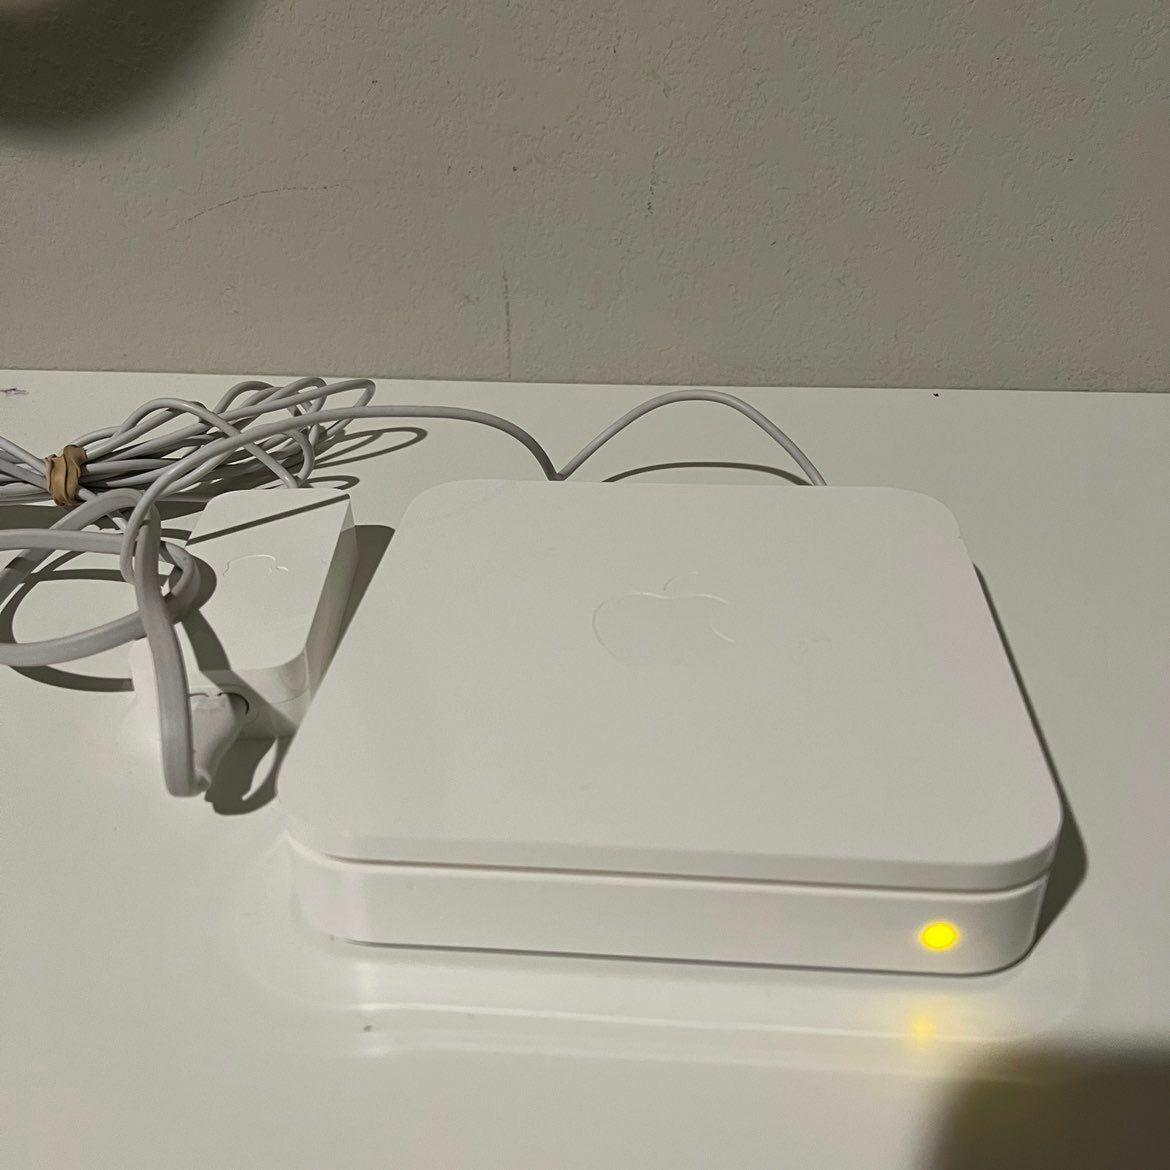 a white apple router sitting on top of a table